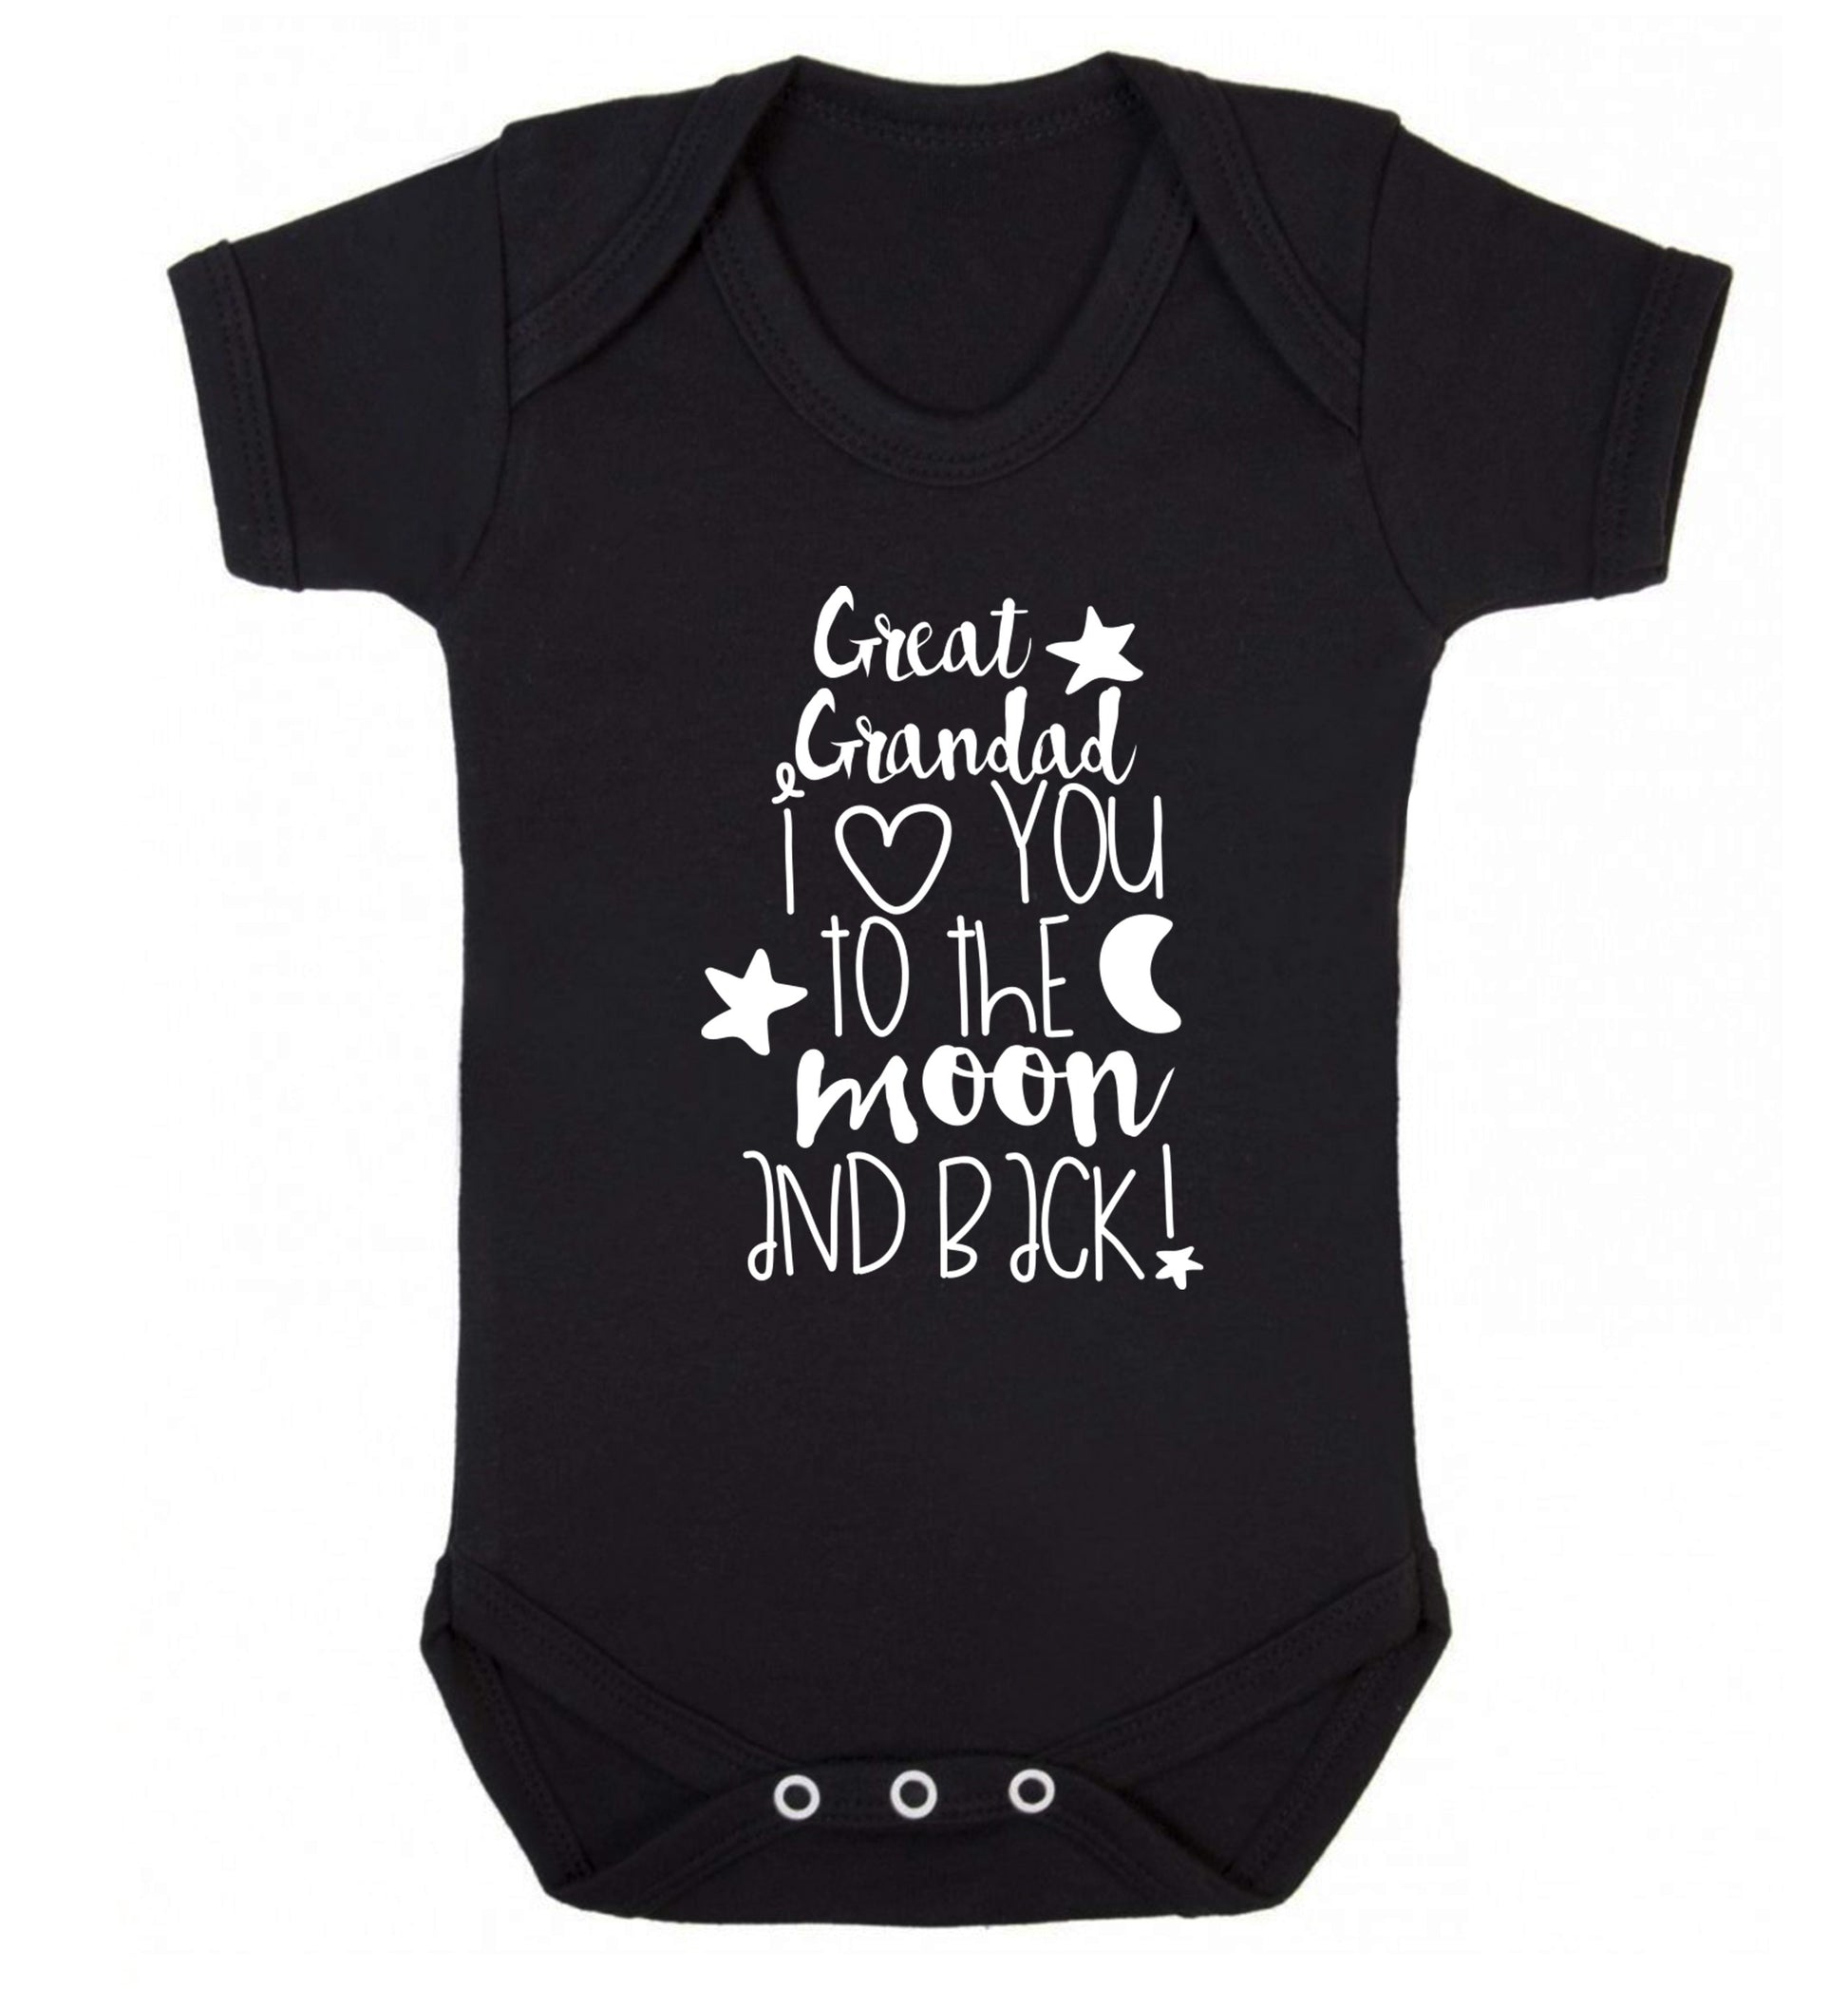 Great Grandad I love you to the moon and back Baby Vest black 18-24 months